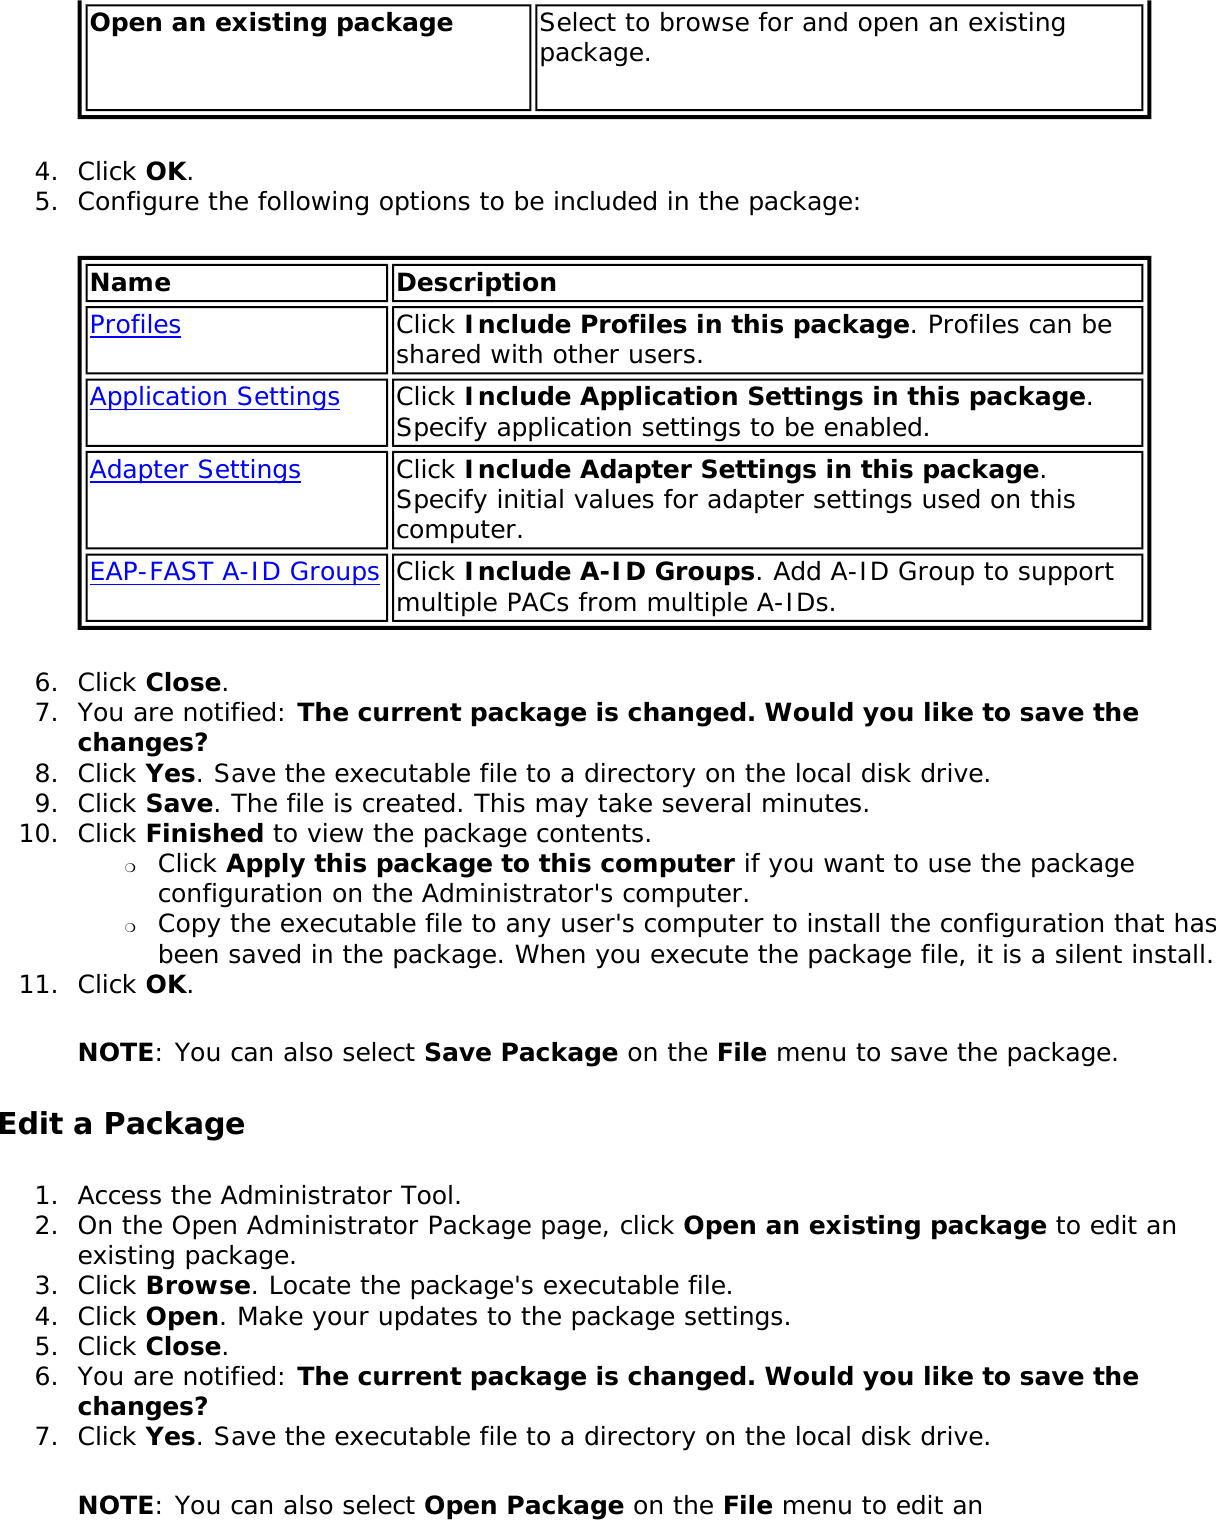 Open an existing package Select to browse for and open an existing package.4.  Click OK.5.  Configure the following options to be included in the package:Name DescriptionProfiles Click Include Profiles in this package. Profiles can be shared with other users. Application Settings Click Include Application Settings in this package. Specify application settings to be enabled.Adapter Settings Click Include Adapter Settings in this package. Specify initial values for adapter settings used on this computer.EAP-FAST A-ID Groups Click Include A-ID Groups. Add A-ID Group to support multiple PACs from multiple A-IDs.6.  Click Close.7.  You are notified: The current package is changed. Would you like to save the changes?8.  Click Yes. Save the executable file to a directory on the local disk drive.9.  Click Save. The file is created. This may take several minutes.10.  Click Finished to view the package contents. ❍     Click Apply this package to this computer if you want to use the package configuration on the Administrator&apos;s computer.❍     Copy the executable file to any user&apos;s computer to install the configuration that has been saved in the package. When you execute the package file, it is a silent install.11.  Click OK.NOTE: You can also select Save Package on the File menu to save the package.Edit a Package1.  Access the Administrator Tool.2.  On the Open Administrator Package page, click Open an existing package to edit an existing package.3.  Click Browse. Locate the package&apos;s executable file.4.  Click Open. Make your updates to the package settings.5.  Click Close.6.  You are notified: The current package is changed. Would you like to save the changes?7.  Click Yes. Save the executable file to a directory on the local disk drive.NOTE: You can also select Open Package on the File menu to edit an 